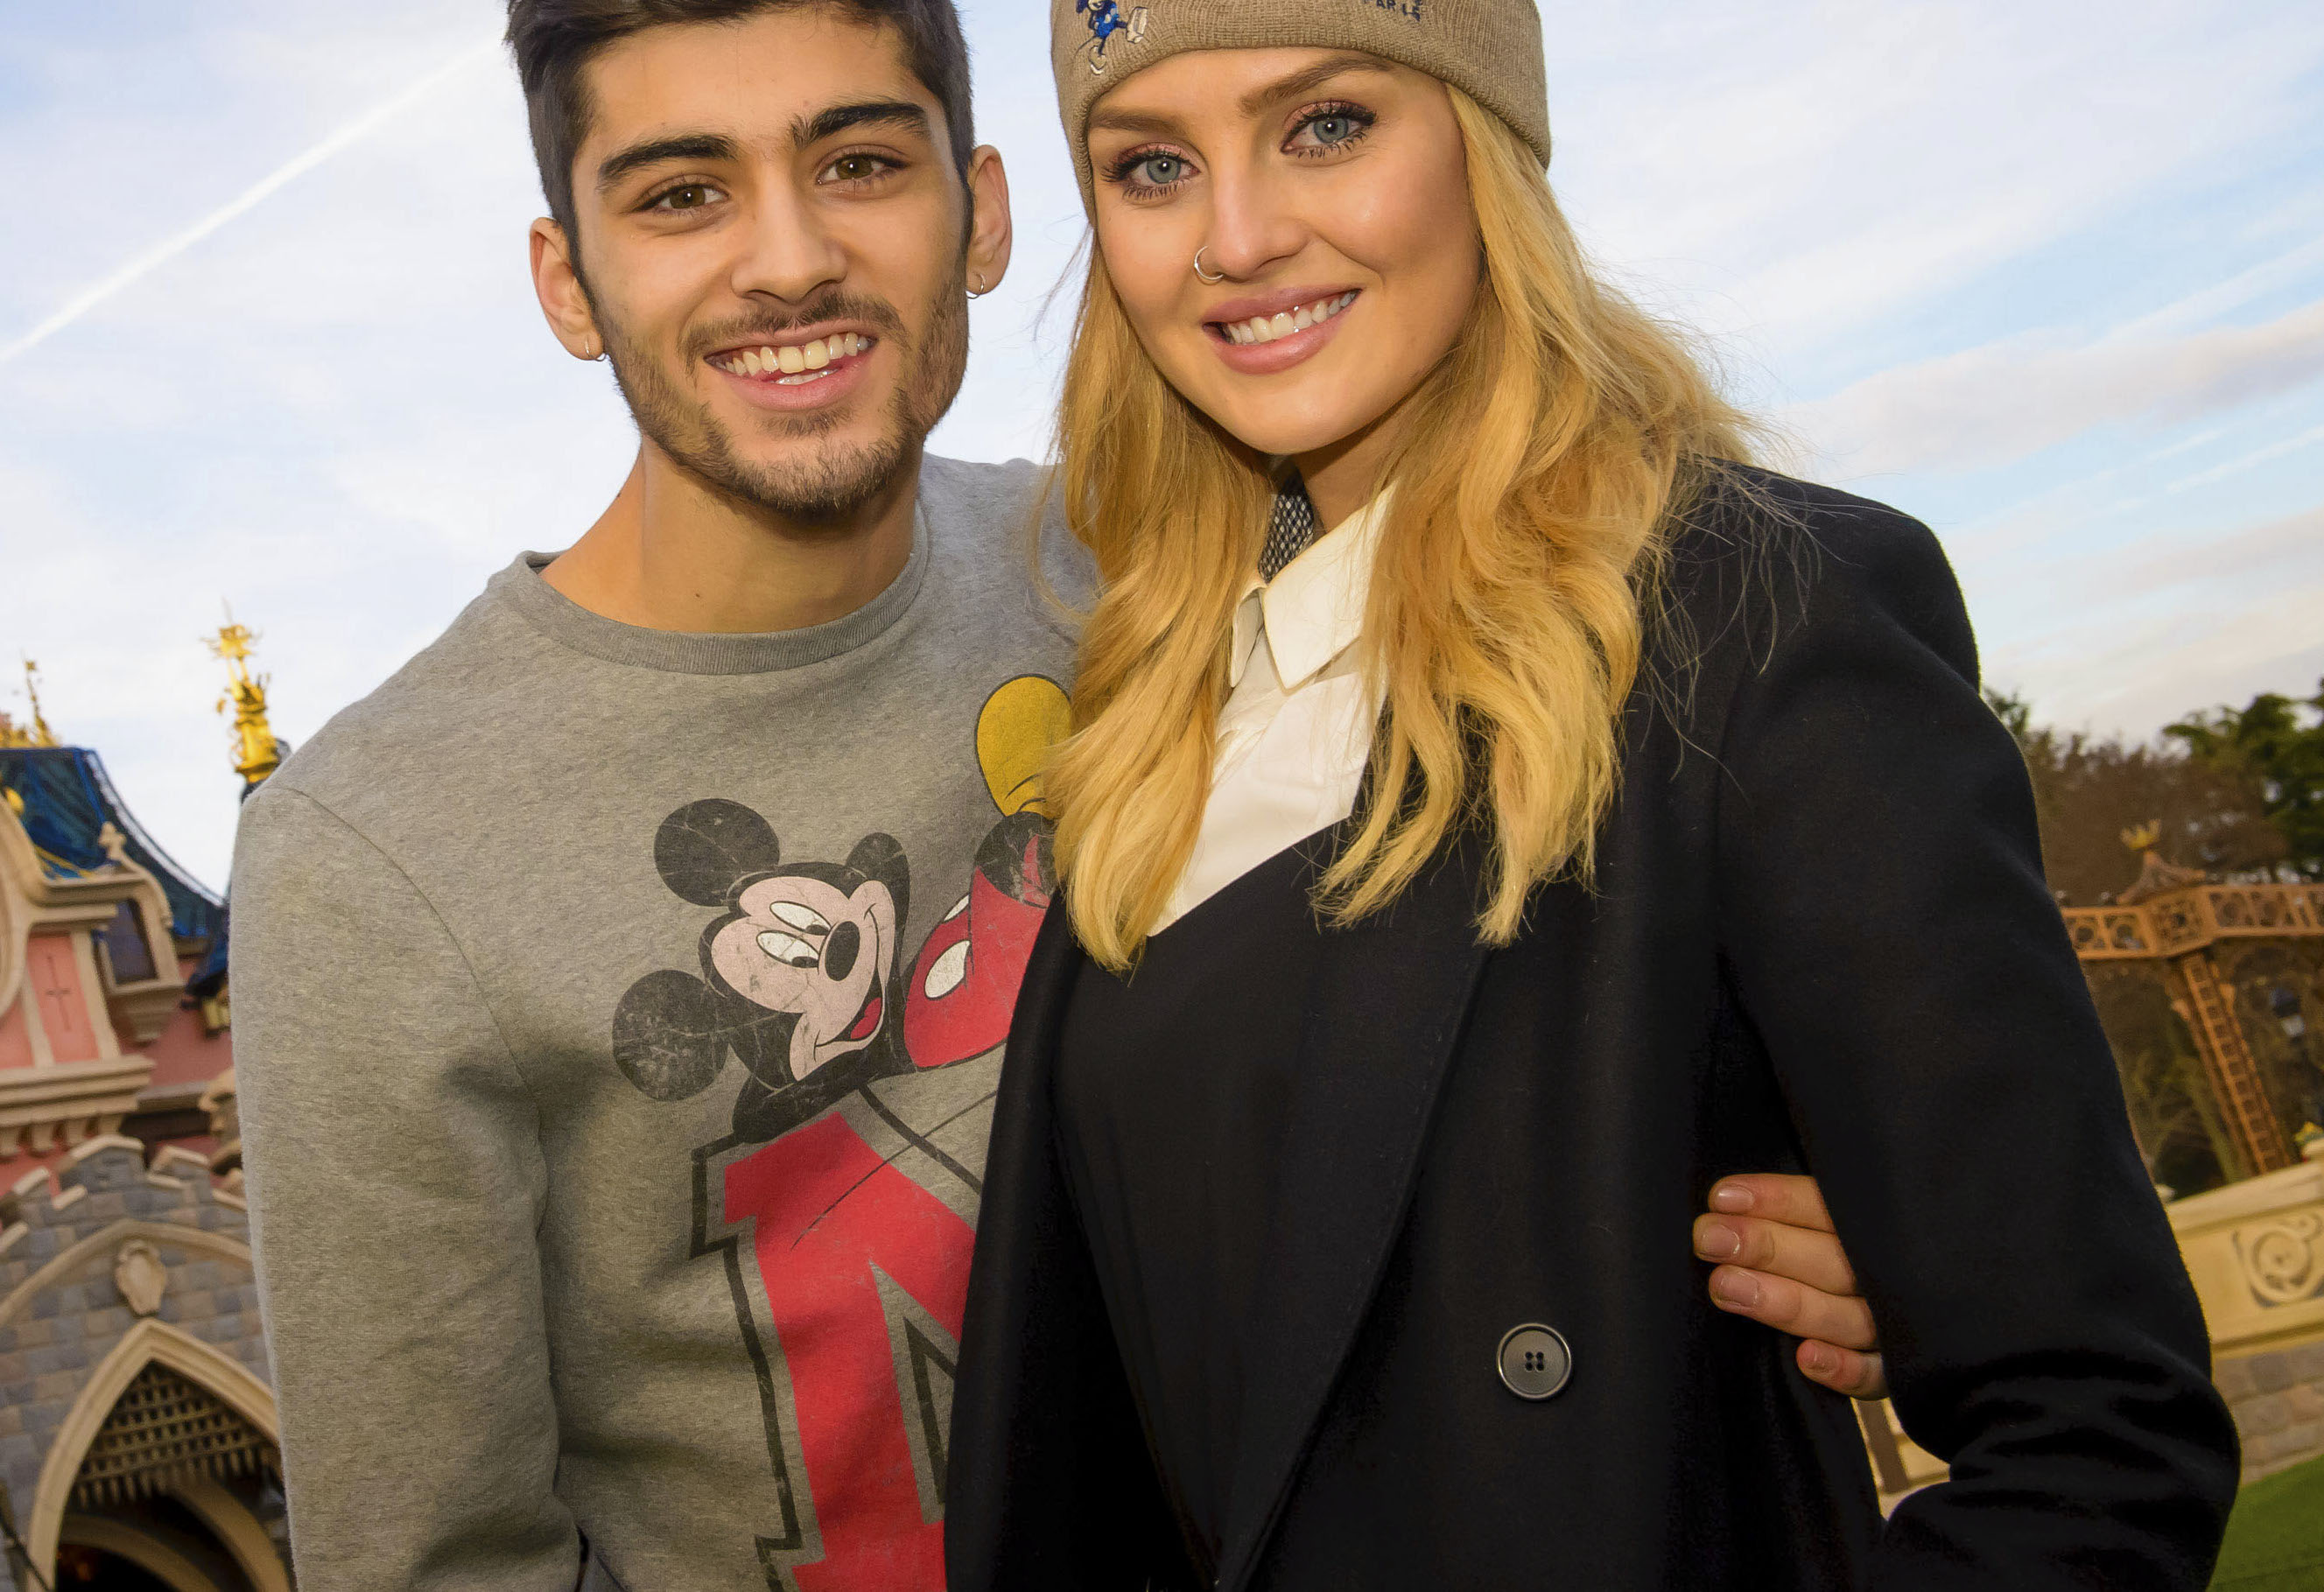 One Directions Zayn Malik Engaged to Perrie Edwards 